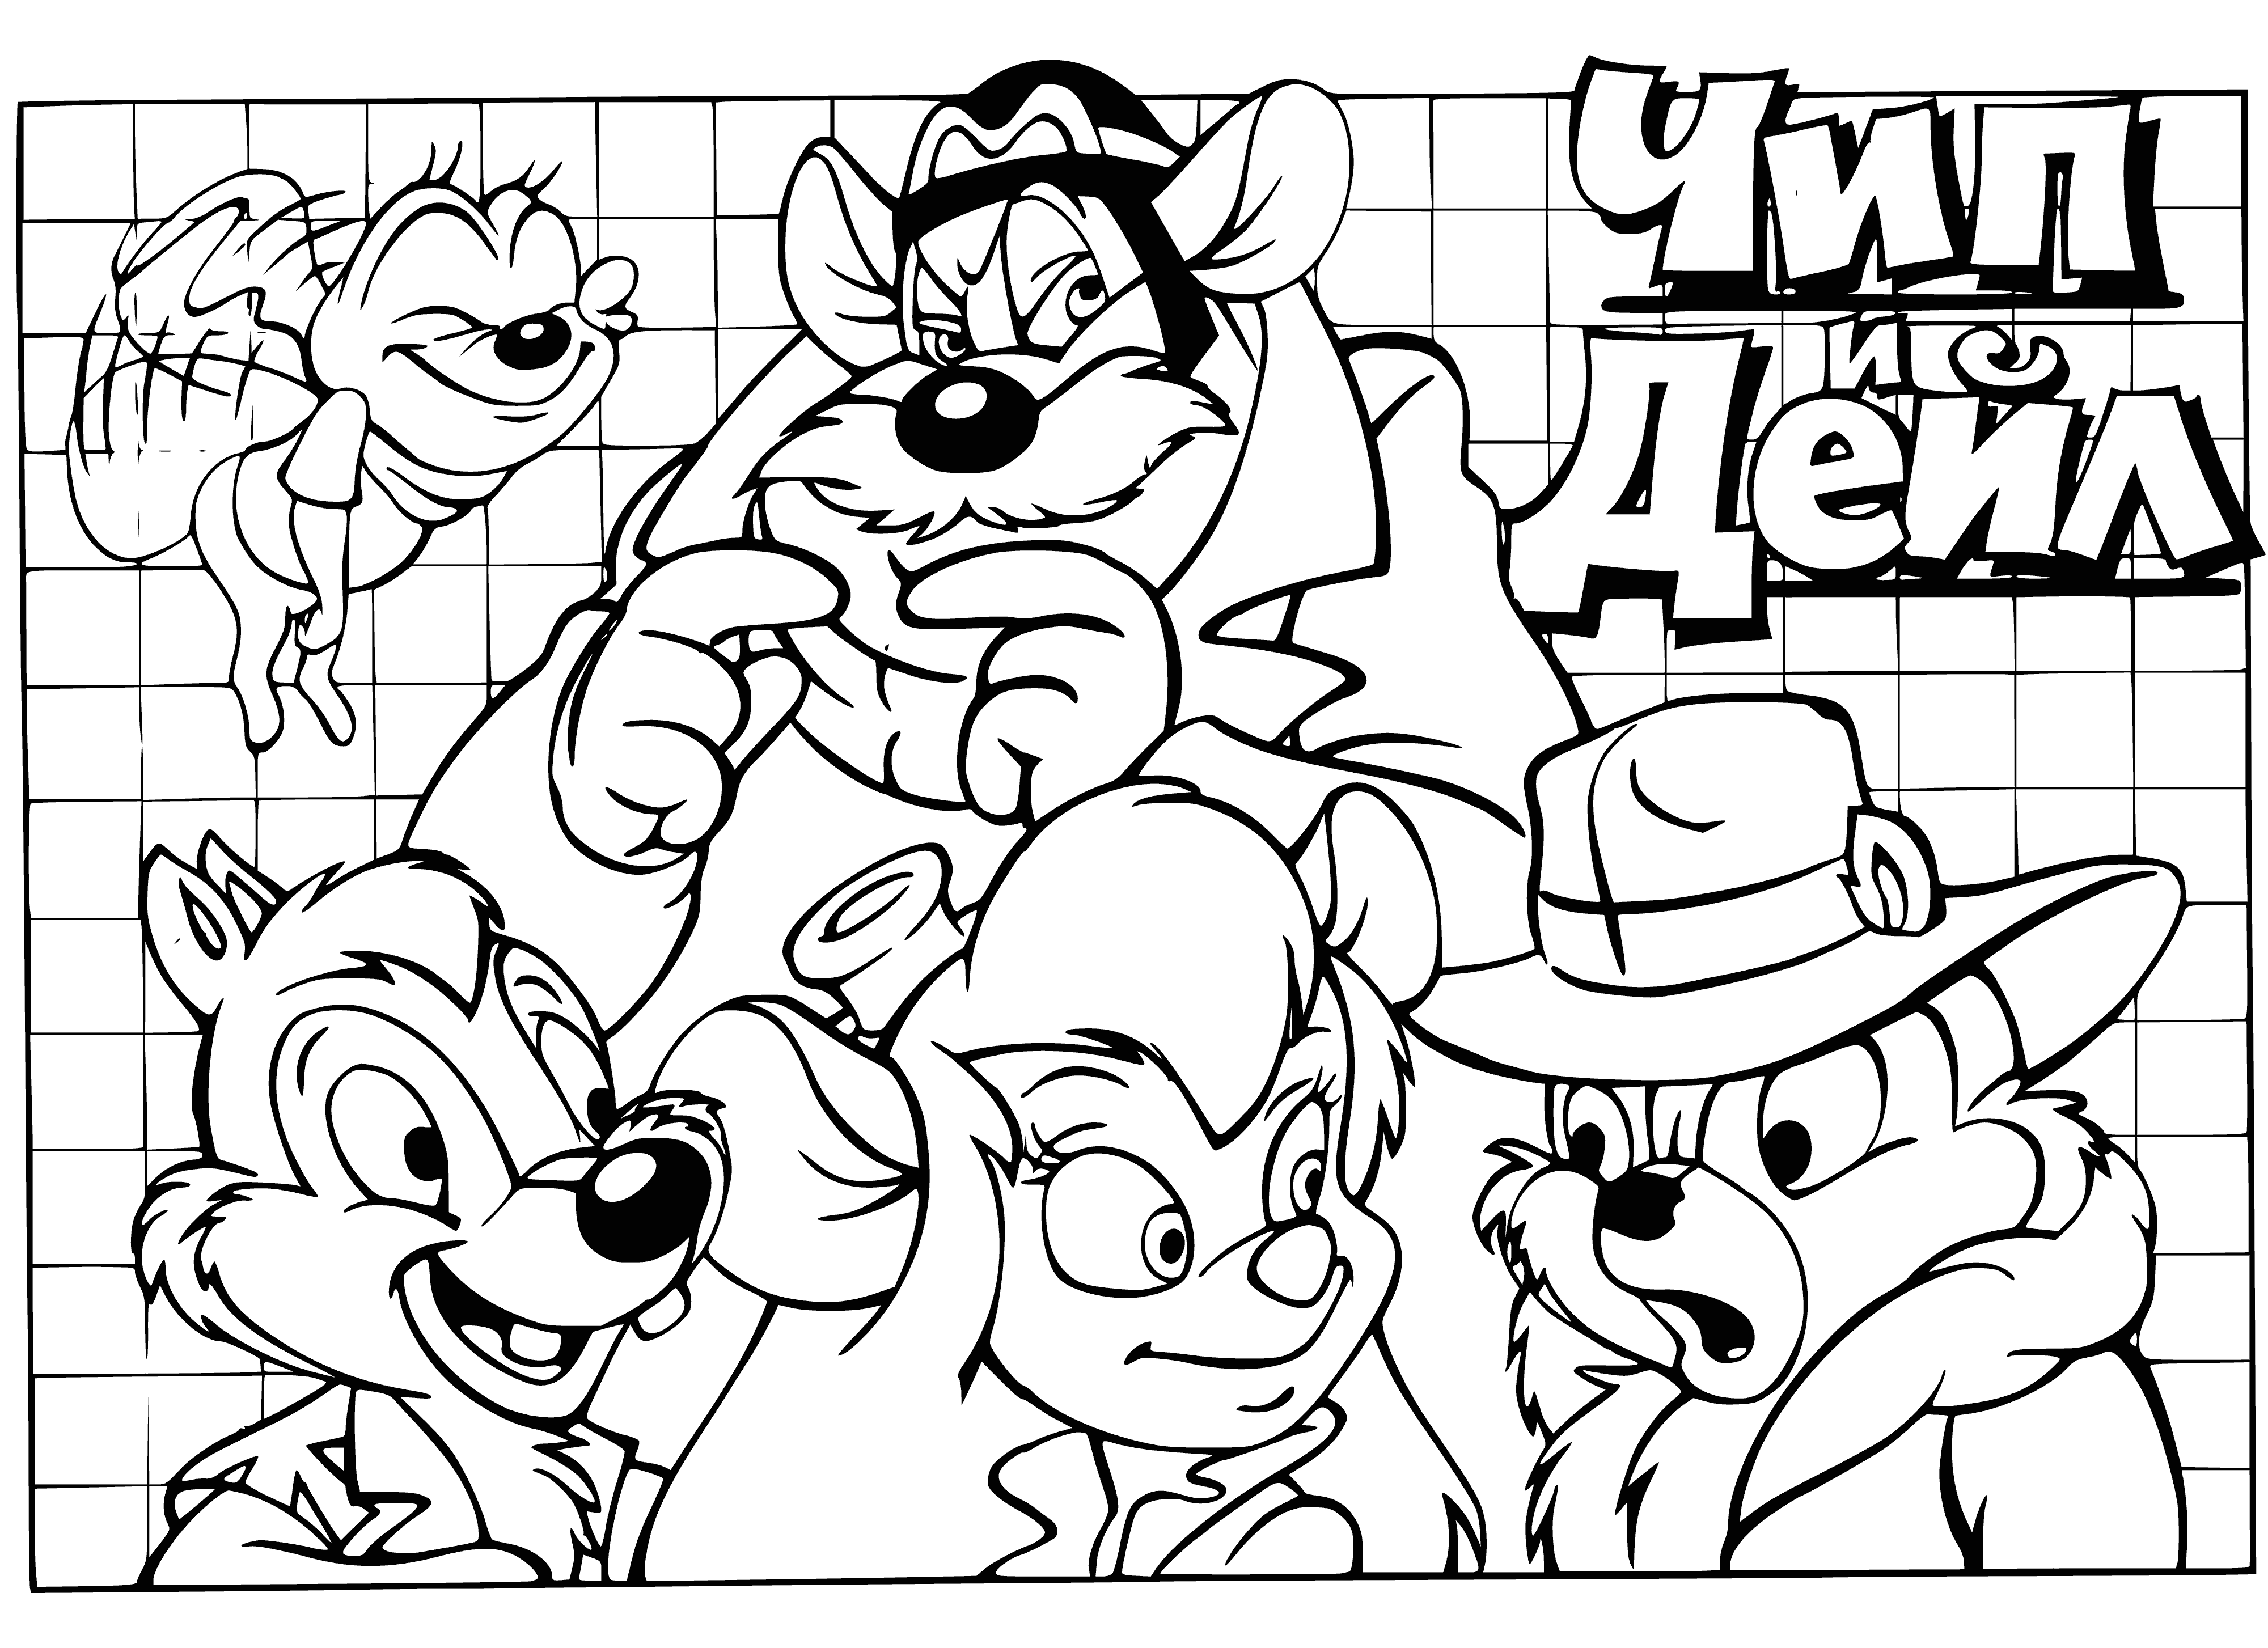 Rescue team coloring page